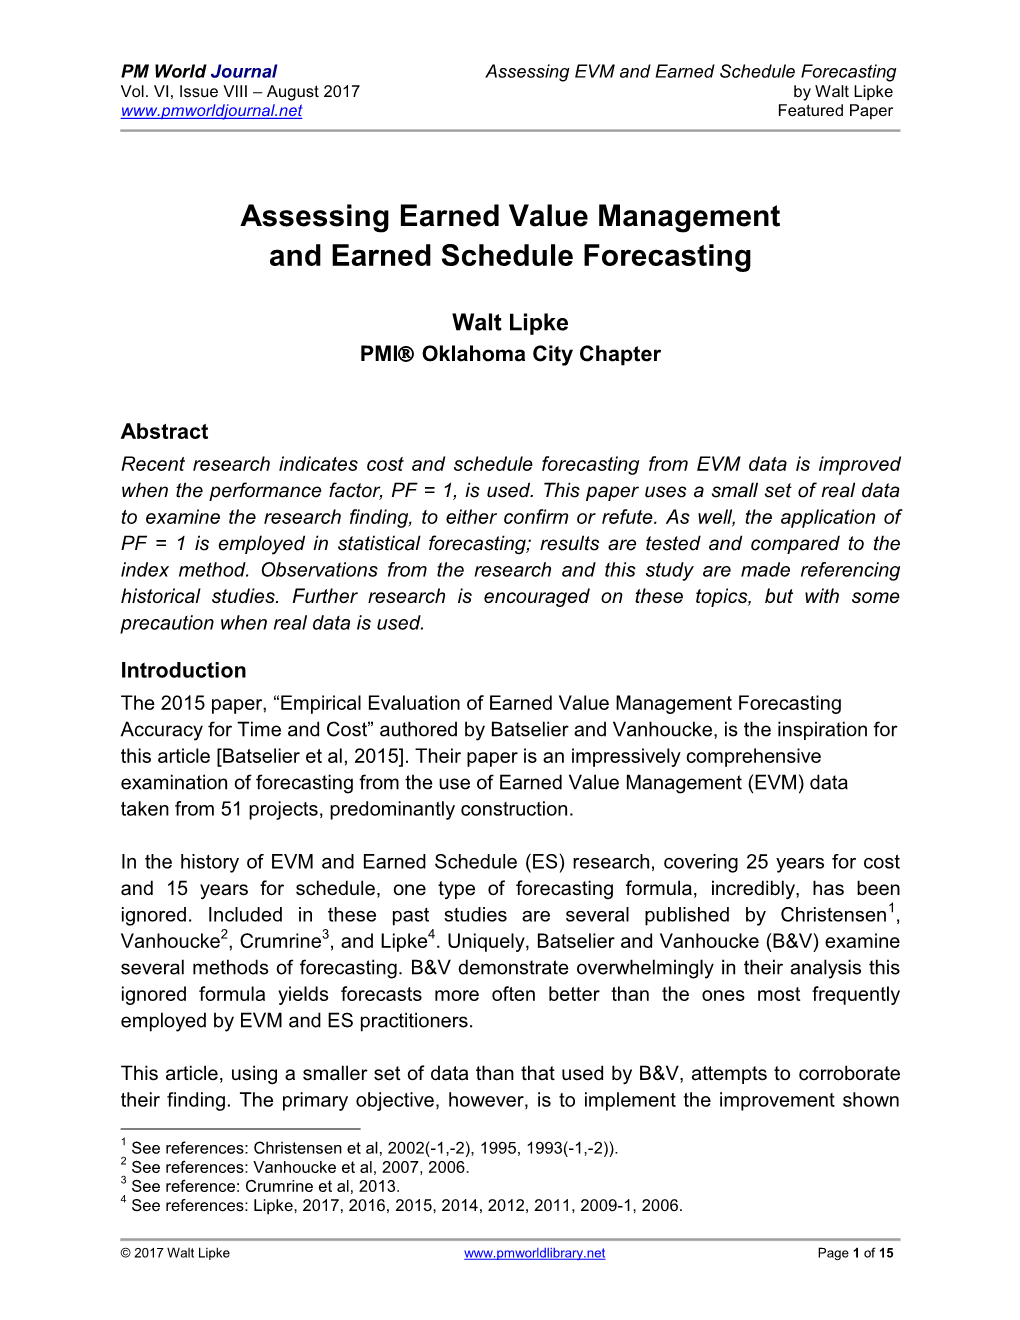 Assessing Earned Value Management and Earned Schedule Forecasting